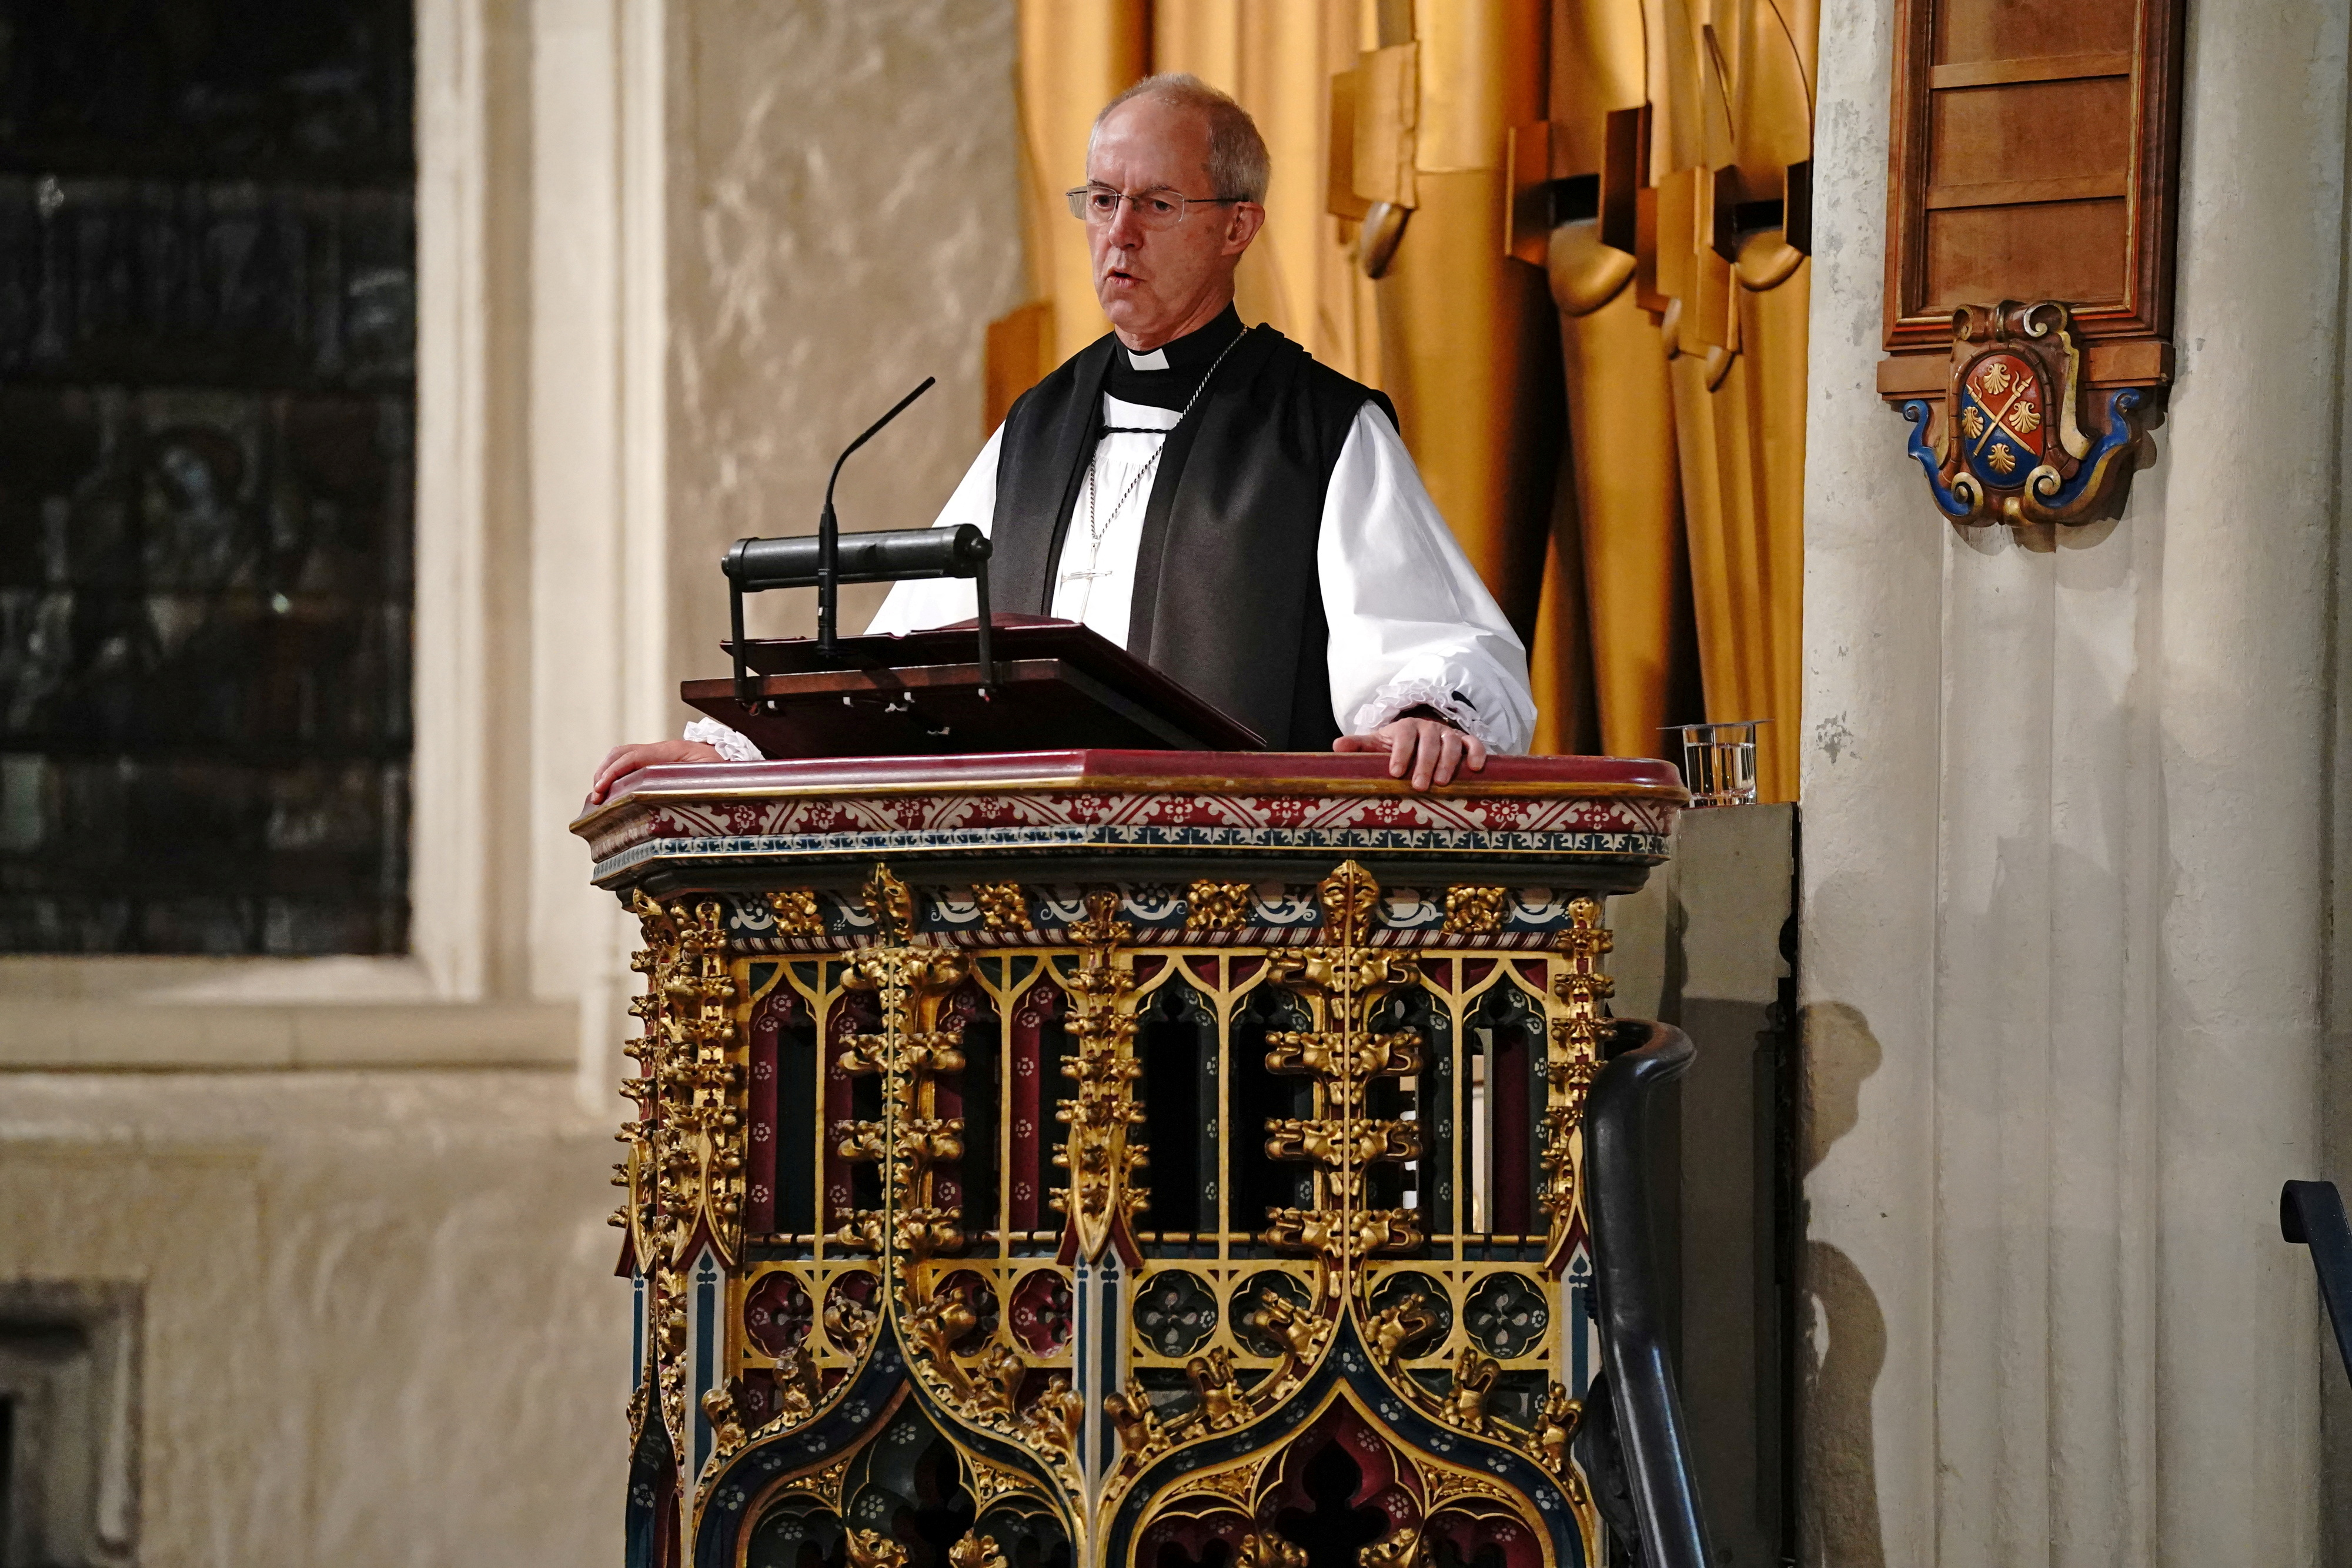 Archbishop of Canterbury to miss Jubilee service due to COVID-19, pneumonia - Reuters